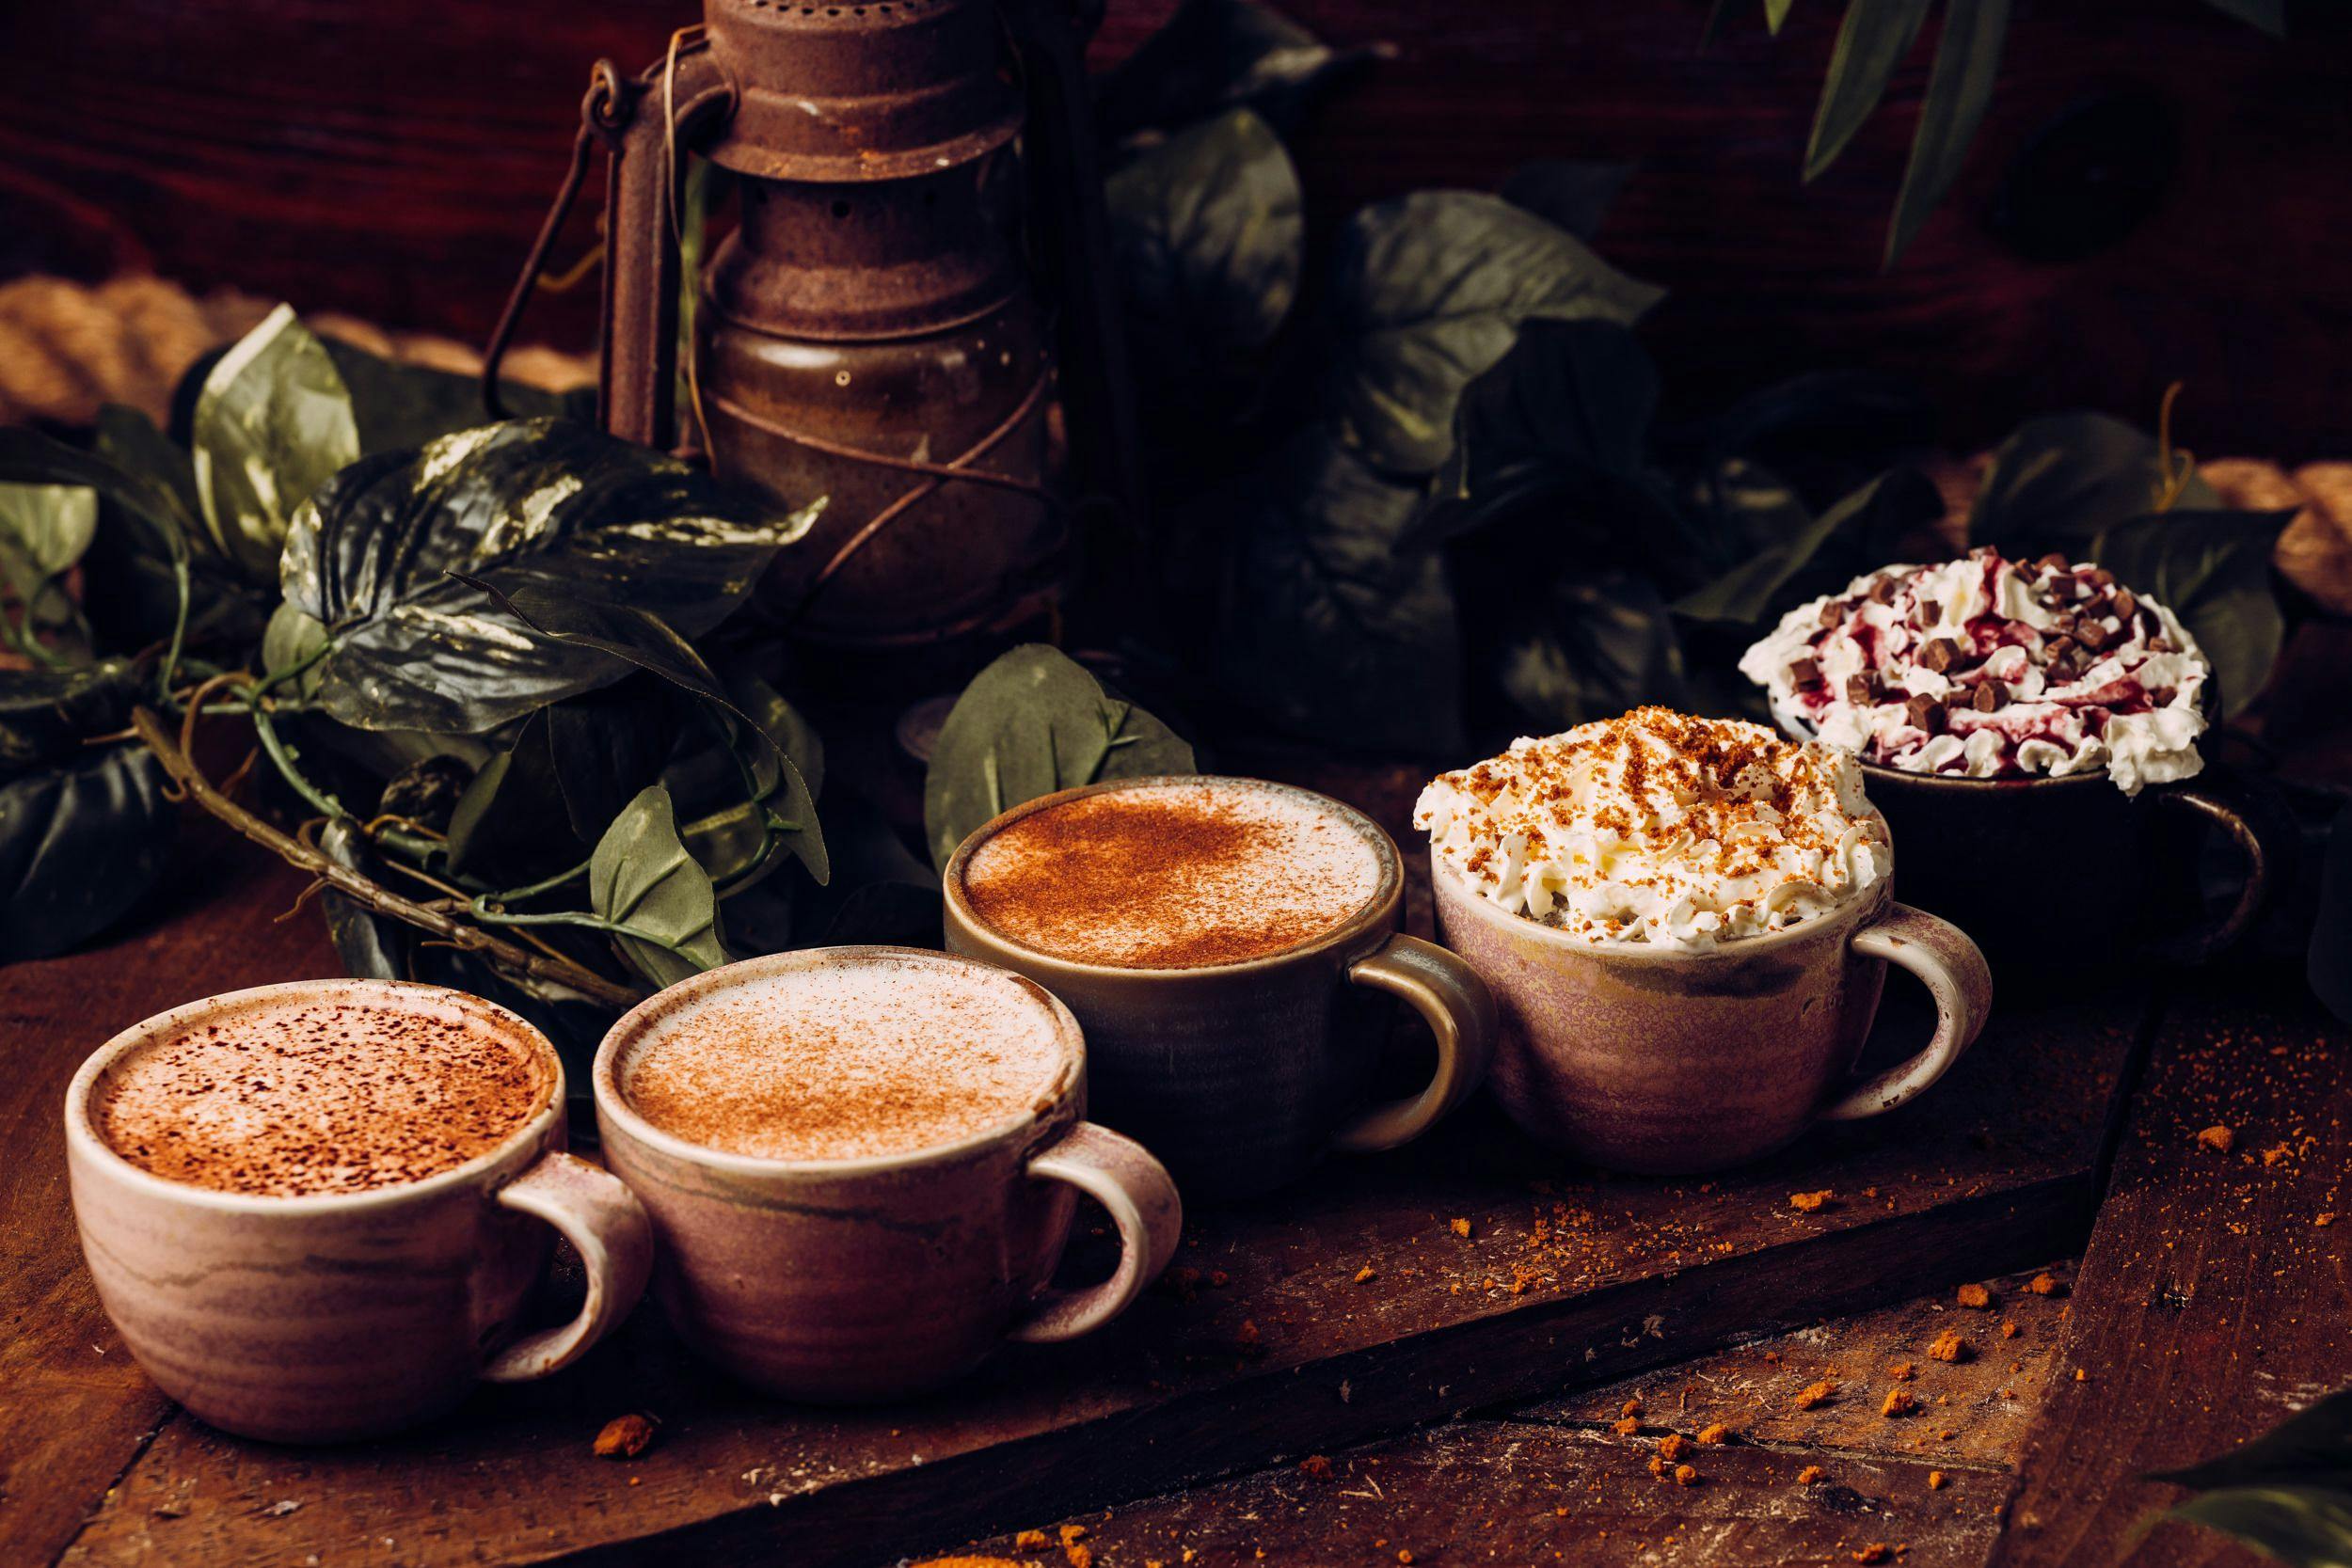 Five festive hot drinks lined up on a table.